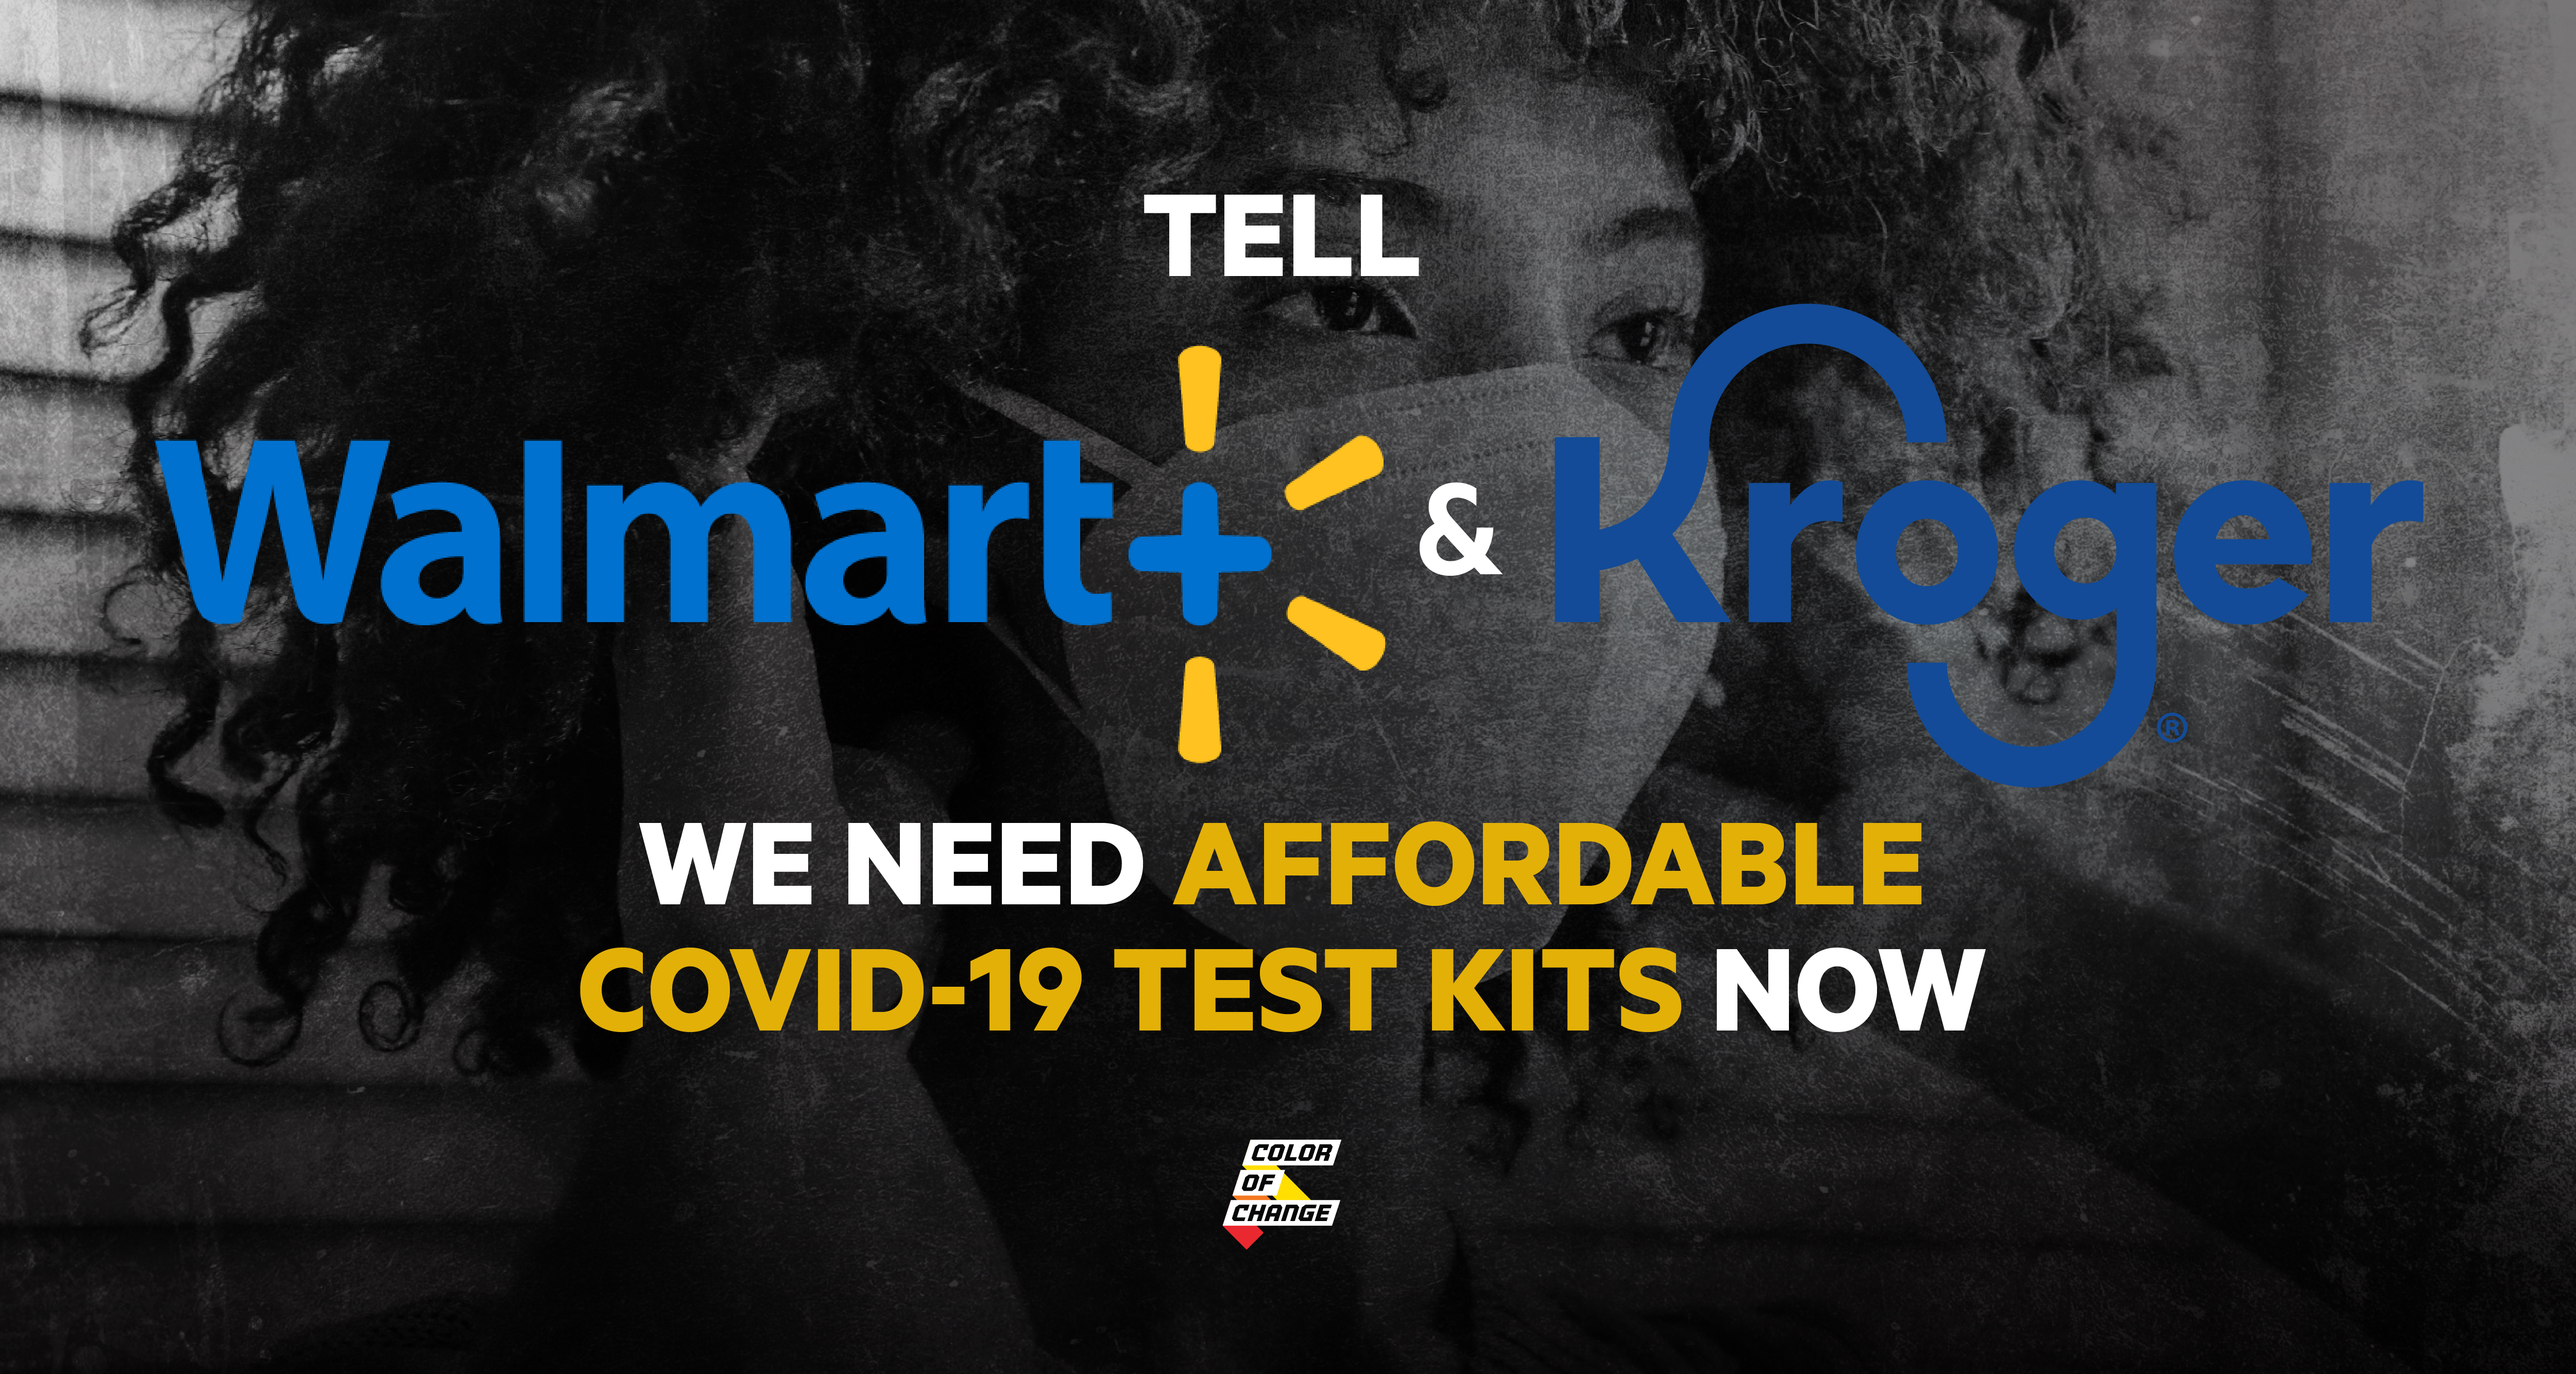 Image of a Black woman wearing a mask with the text 'Tell Walmart & Kroger: ION GOT IT. We need affordable COVID-19 tests now